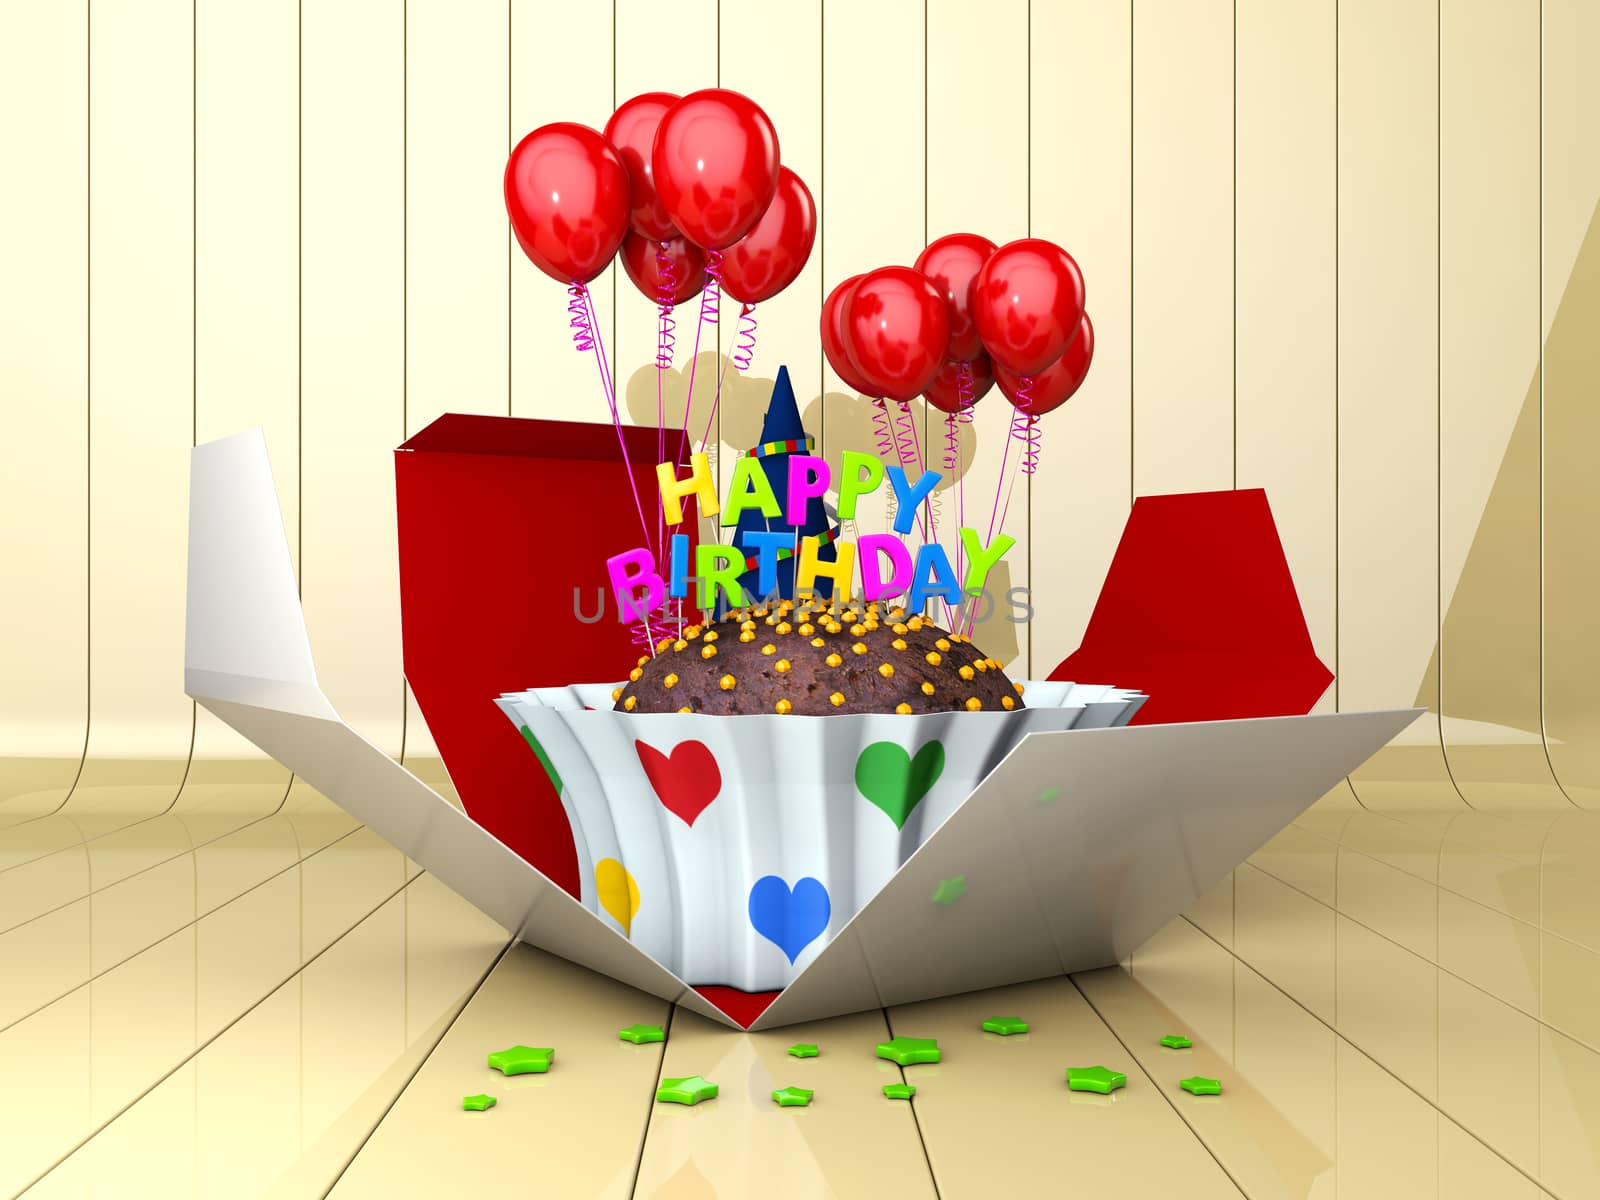 3d Illustration of Birthday cake with red balloons.